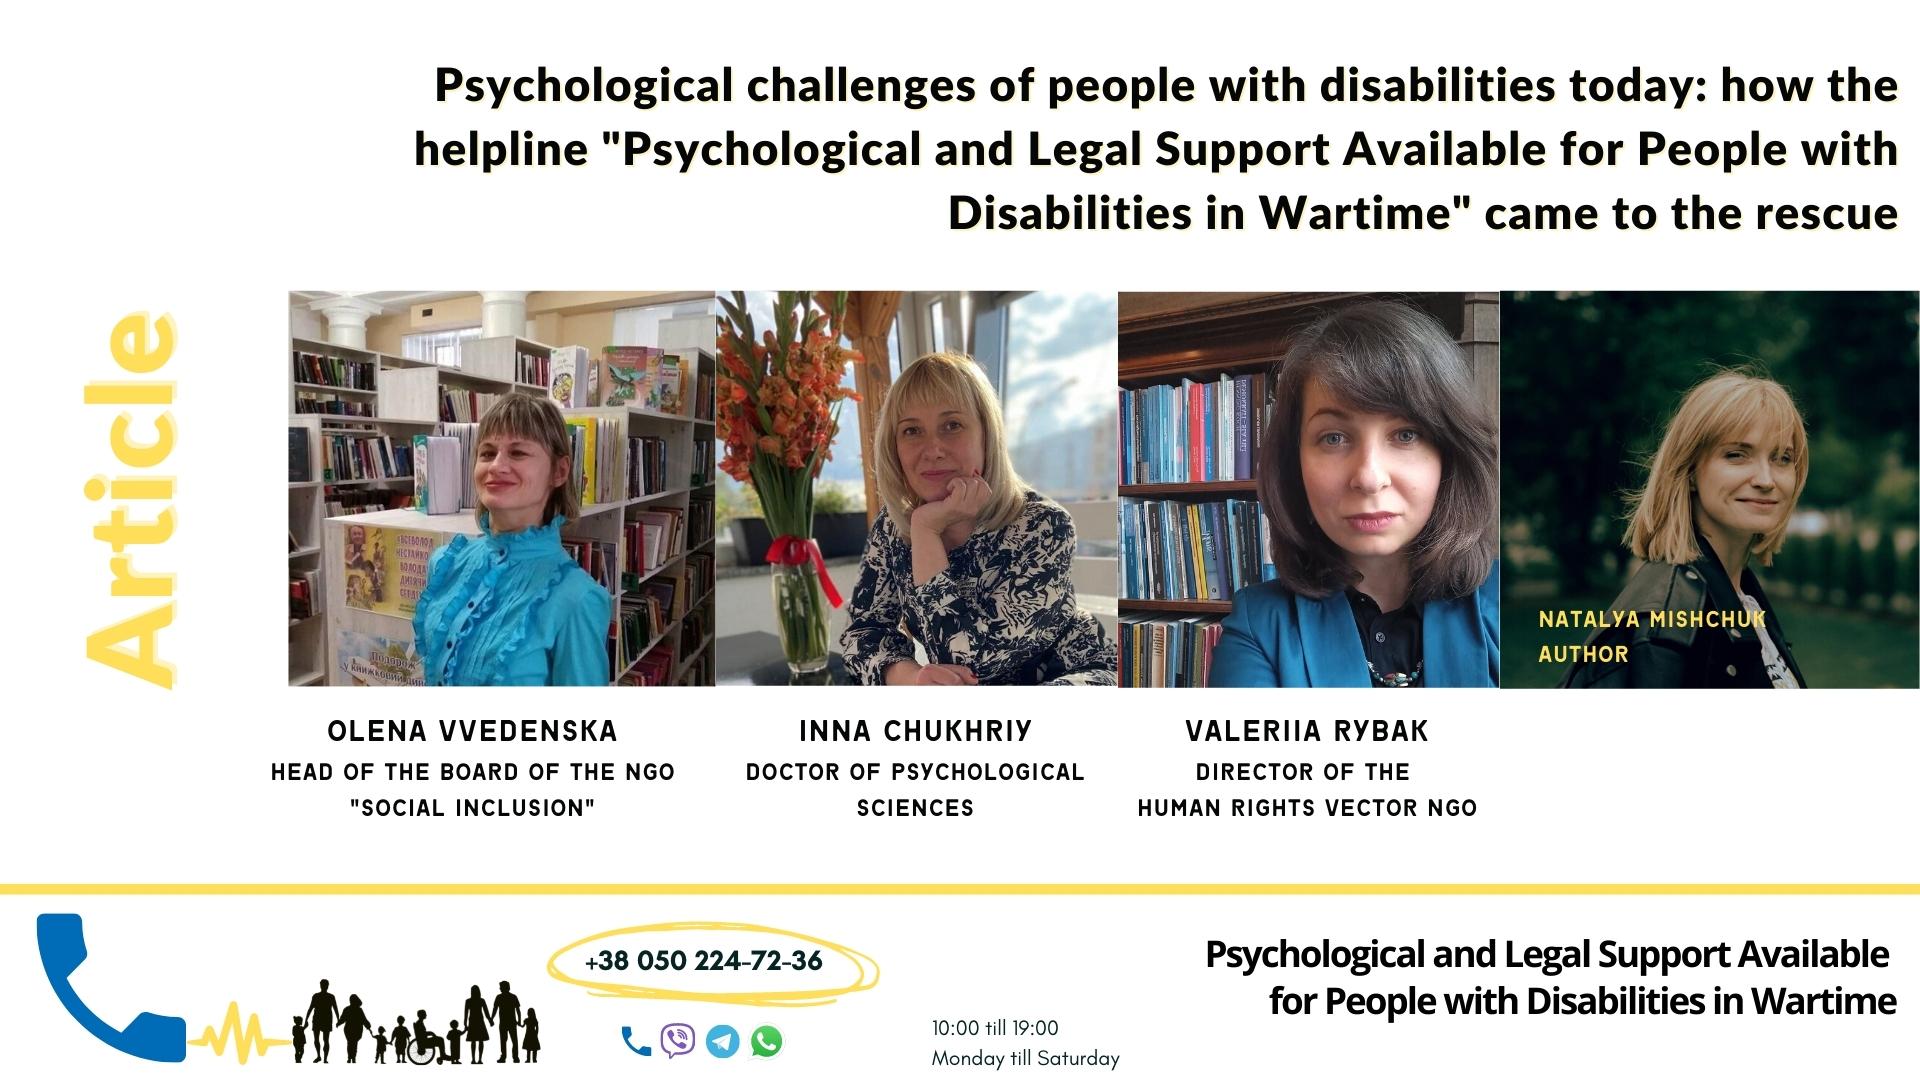 Psychological challenges of people with disabilities today: how the helpline "Psychological and Legal Support Available for People with Disabilities in Wartime" came to the rescue